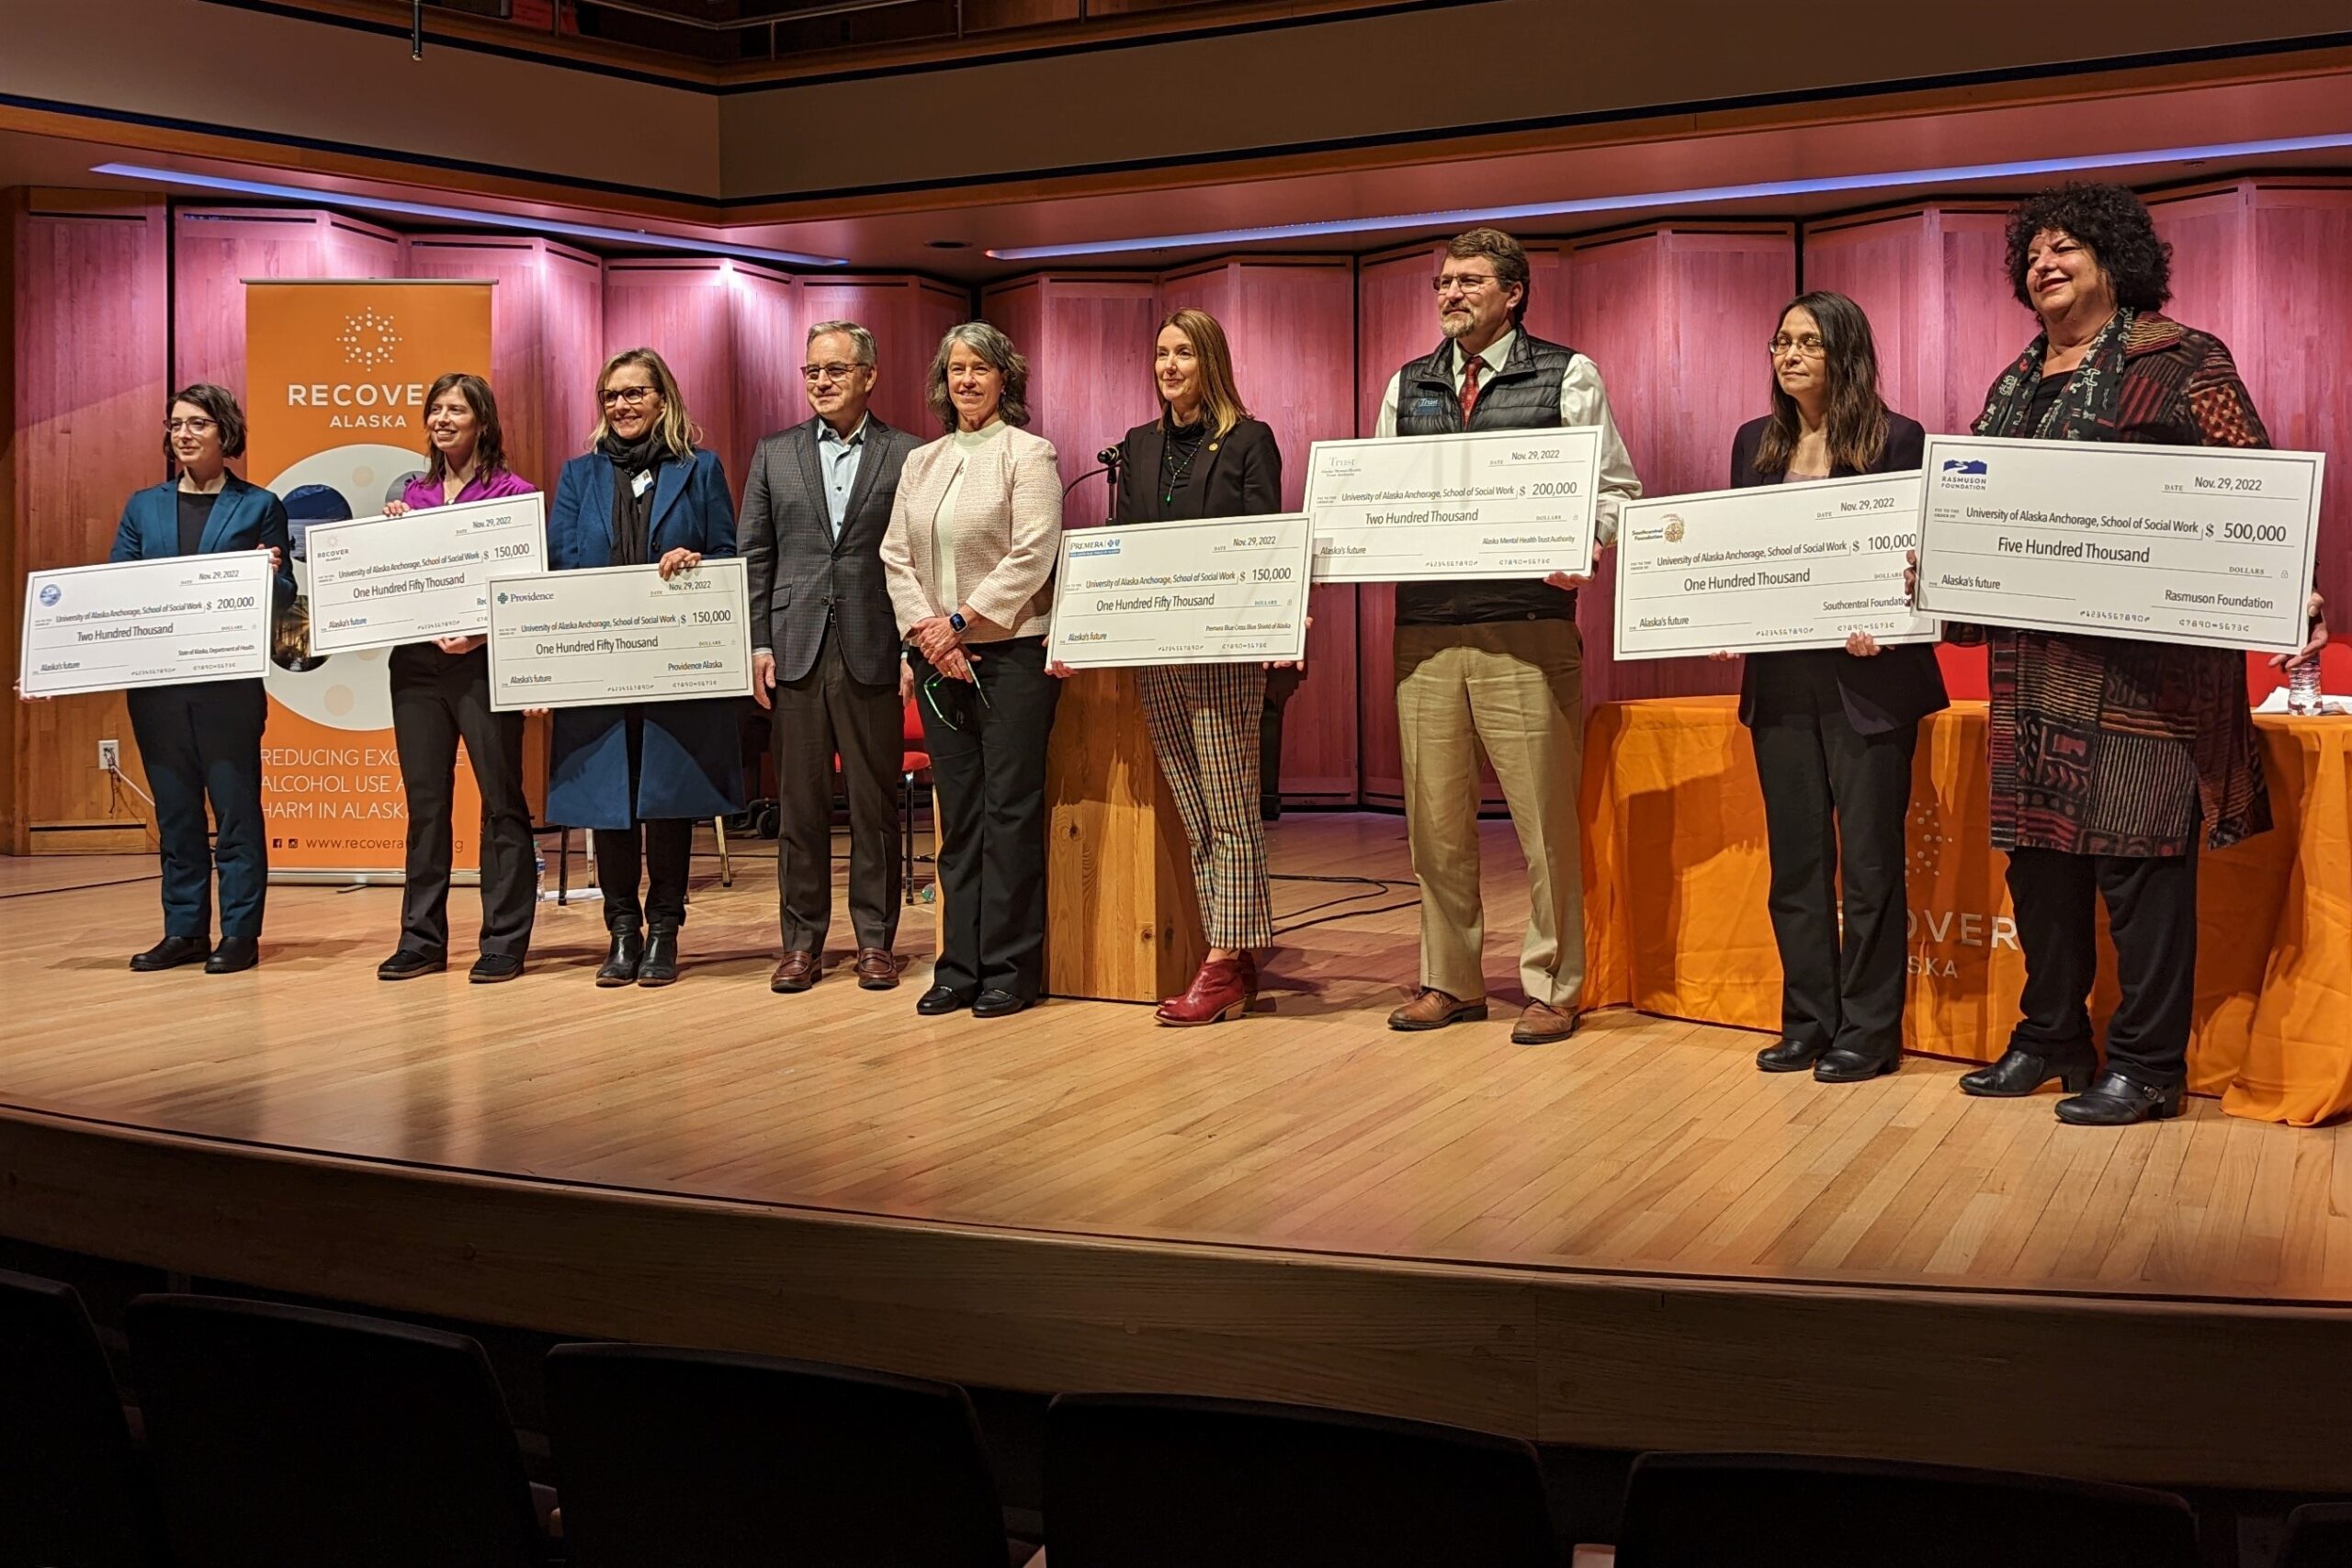 Representatives of various institutions that pitched in for a $1.5 million grant to the University of Alaska Anchorage’s School of Social Work pose for photos with oversized checks during a press conference